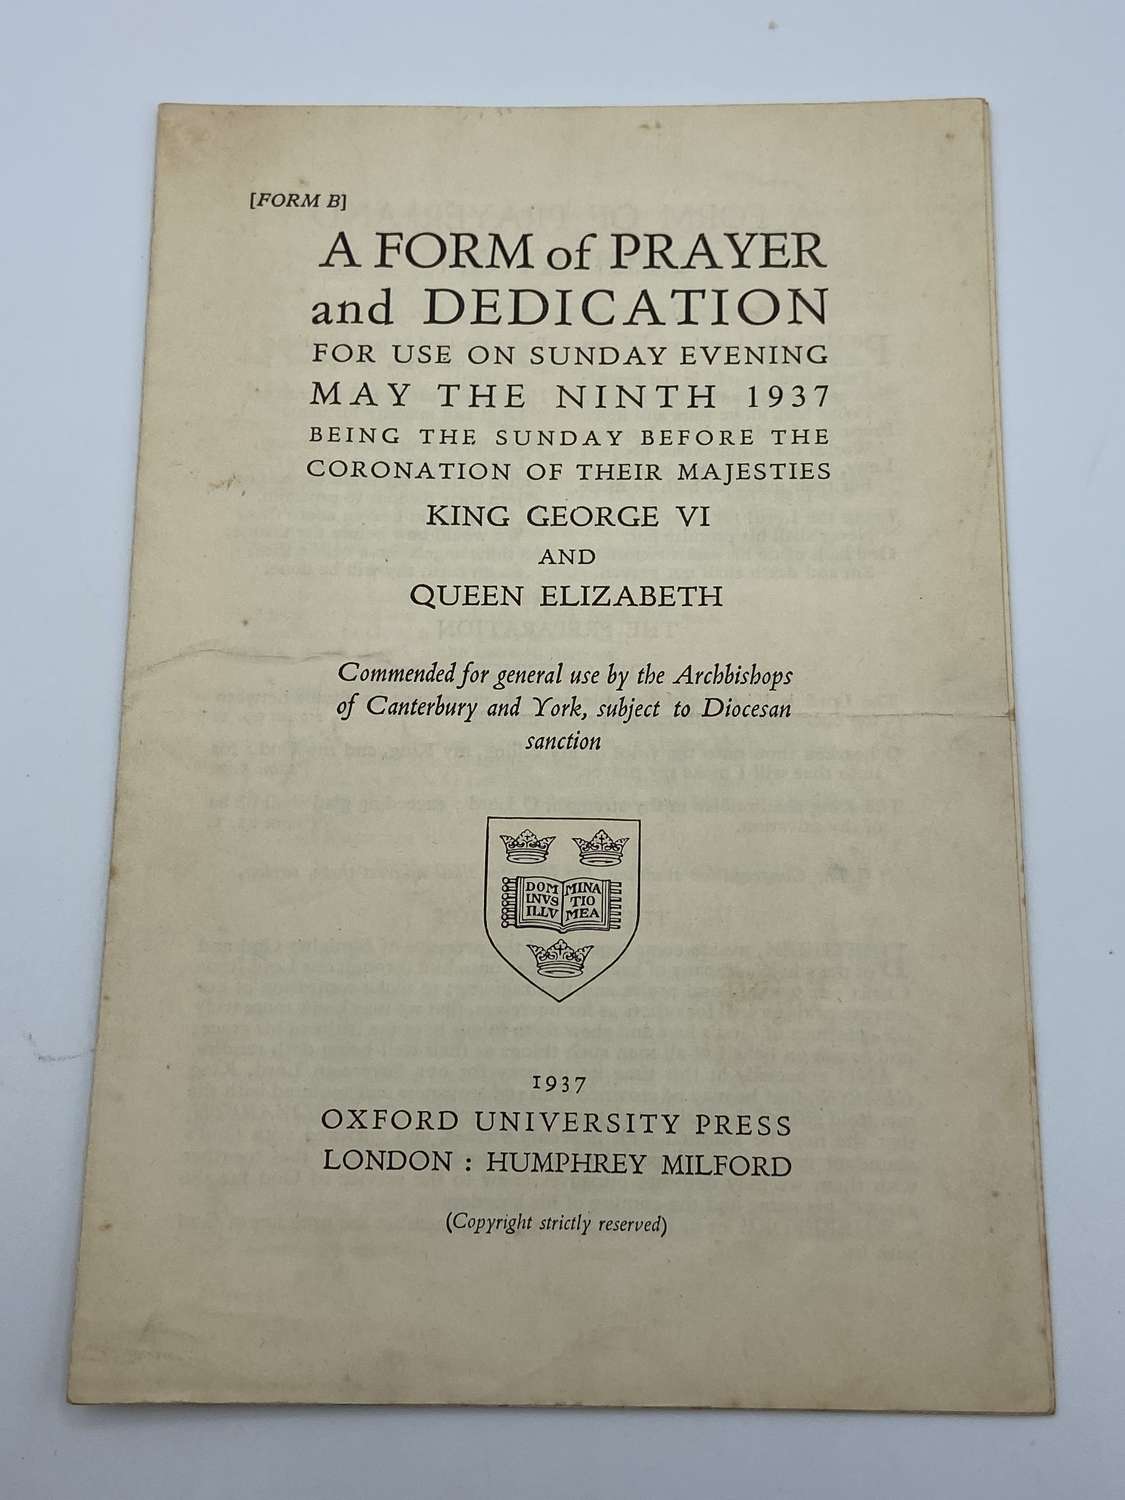 WW2 1937 Prayer form for Coronation Service of King George VI & Queen